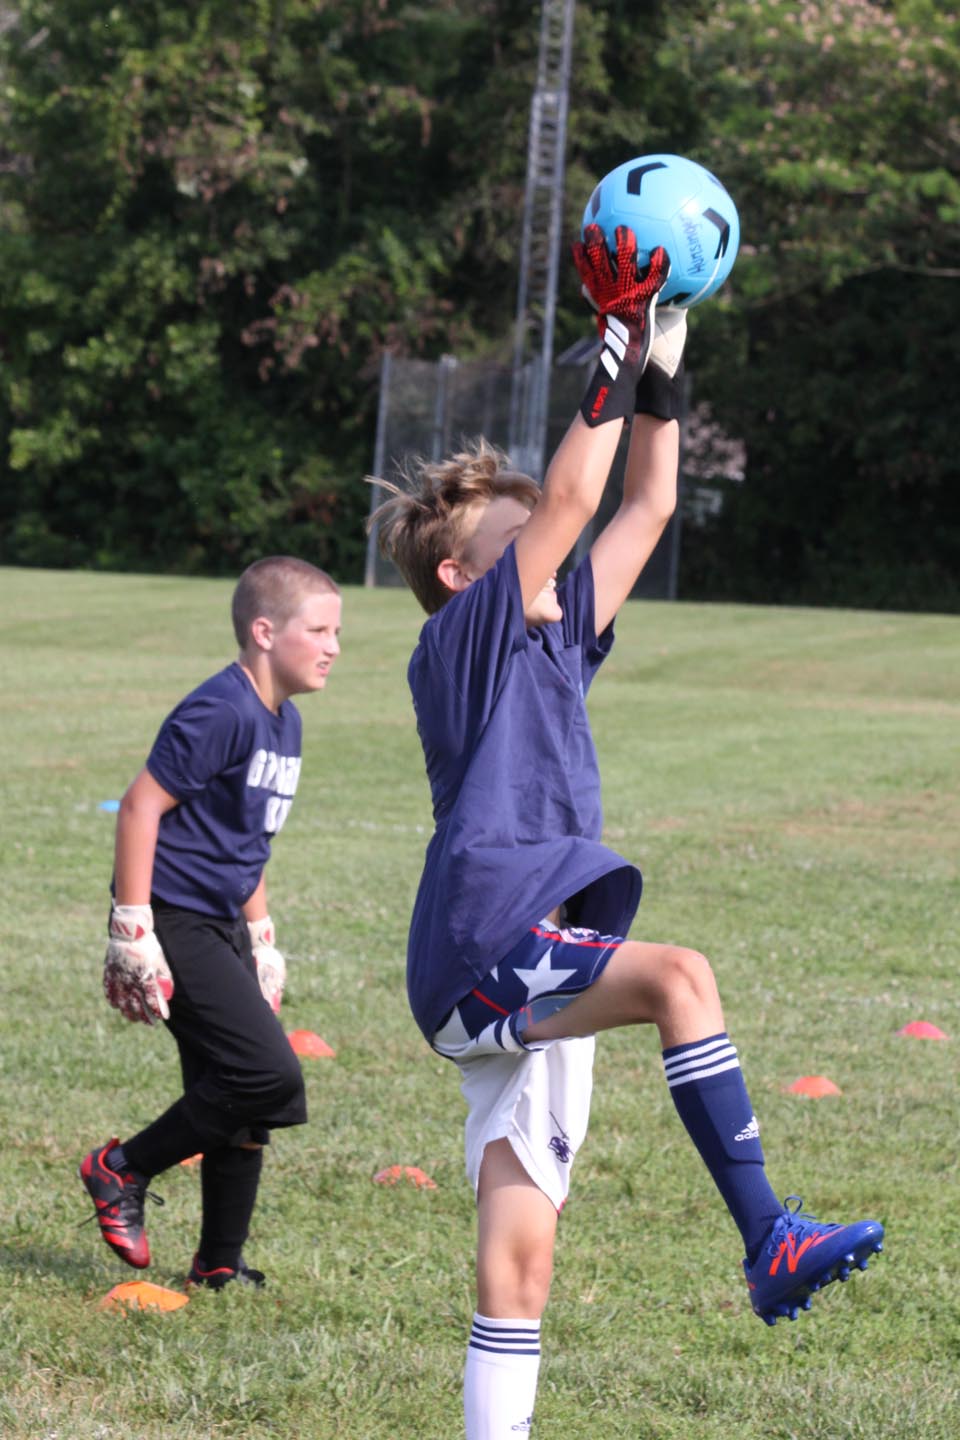 Goalkeeper camps and clinics